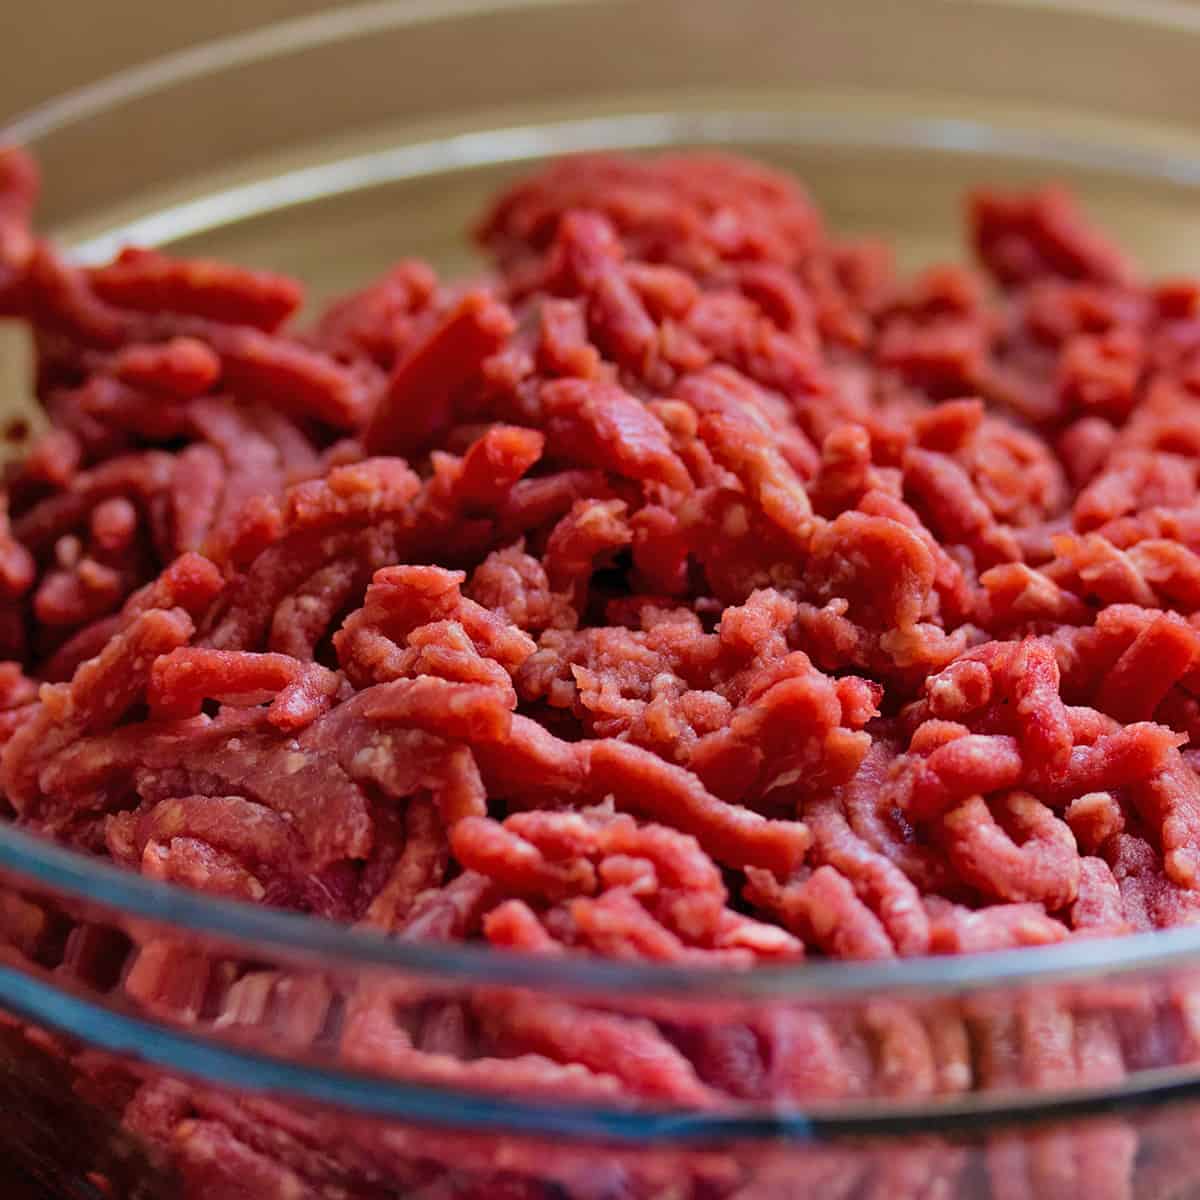 Bowl of ground beef to learn to boil